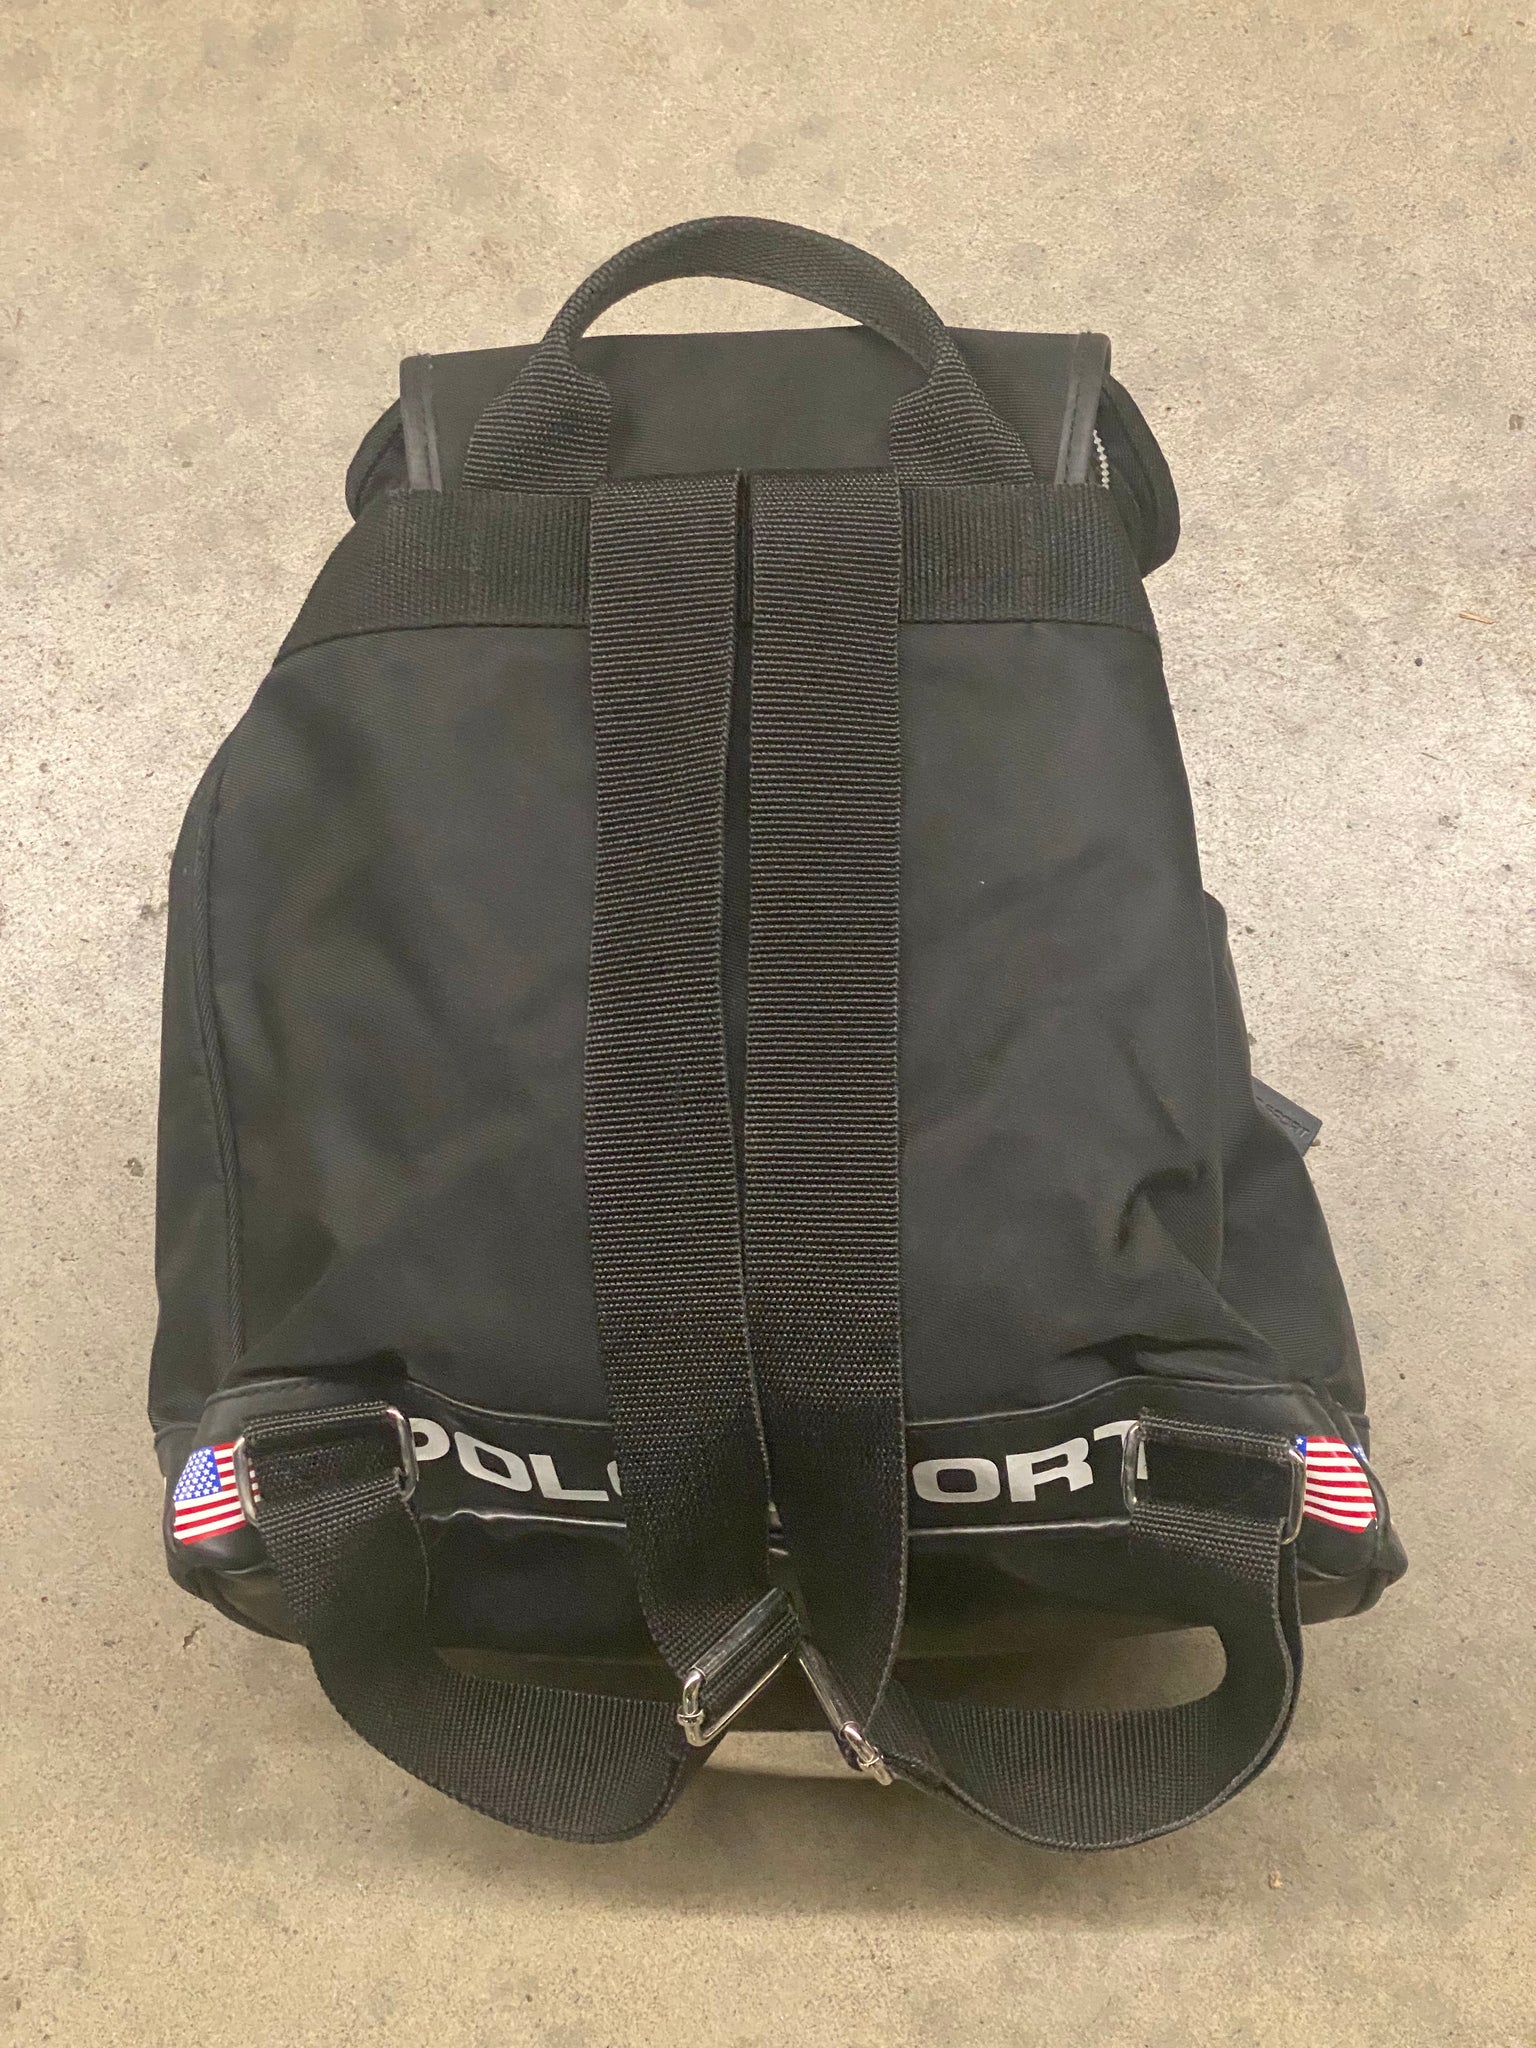 1990S POLO SPORT DRAWSTRING BACKPACK